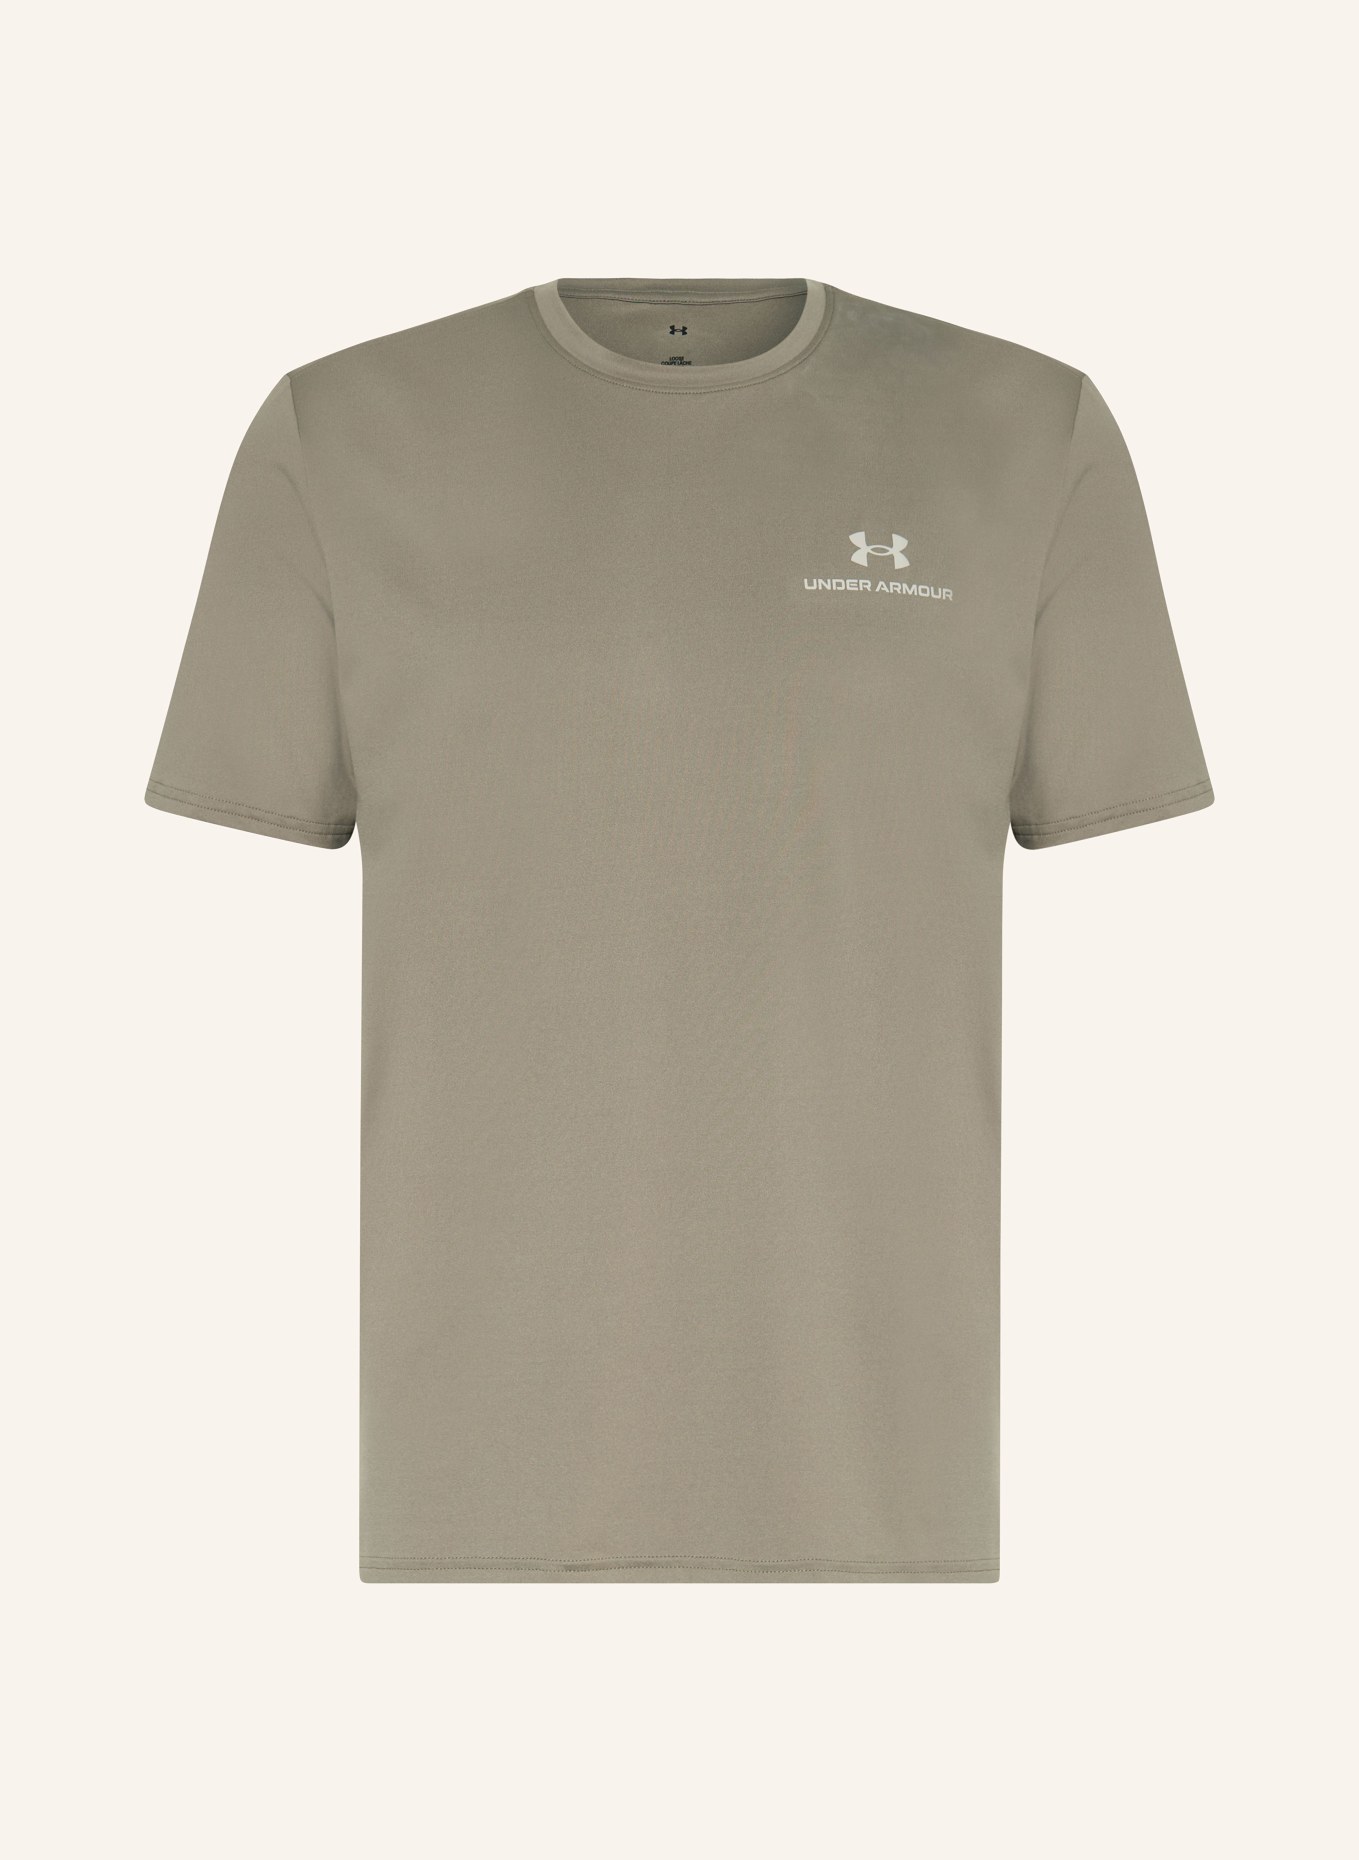 UNDER ARMOUR T-Shirt UA RUSH™ ENERGY in taupe